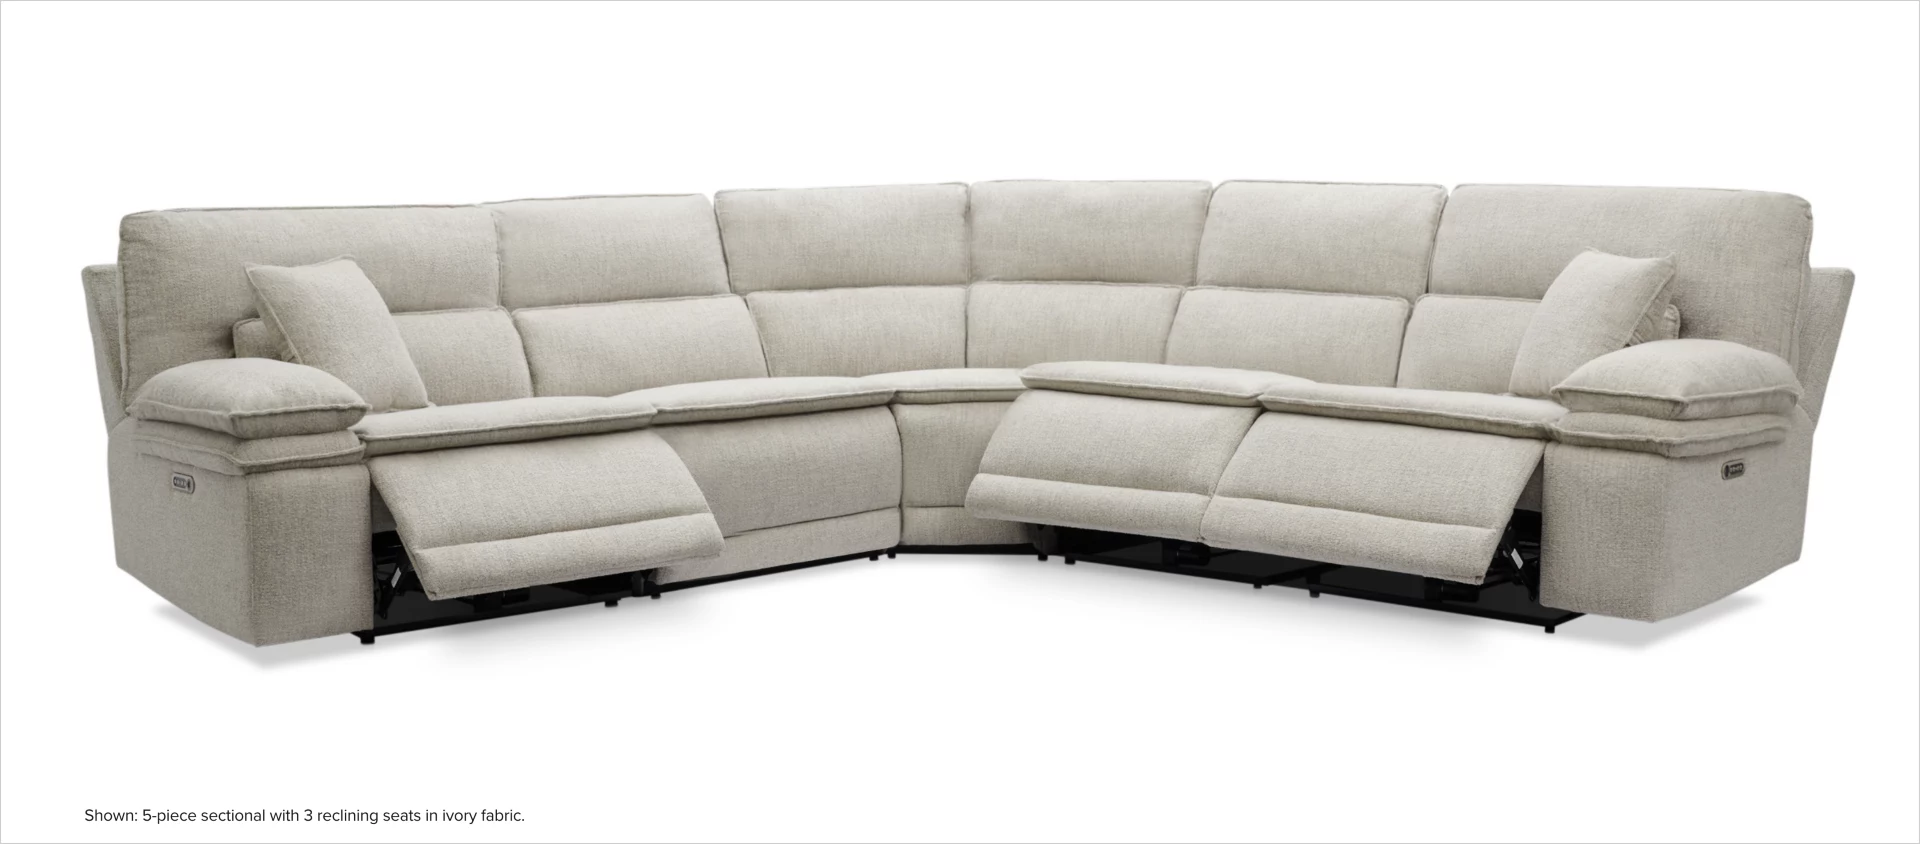 Brookdale 5-piece sectional with 3 reclining seats in ivory fabric.